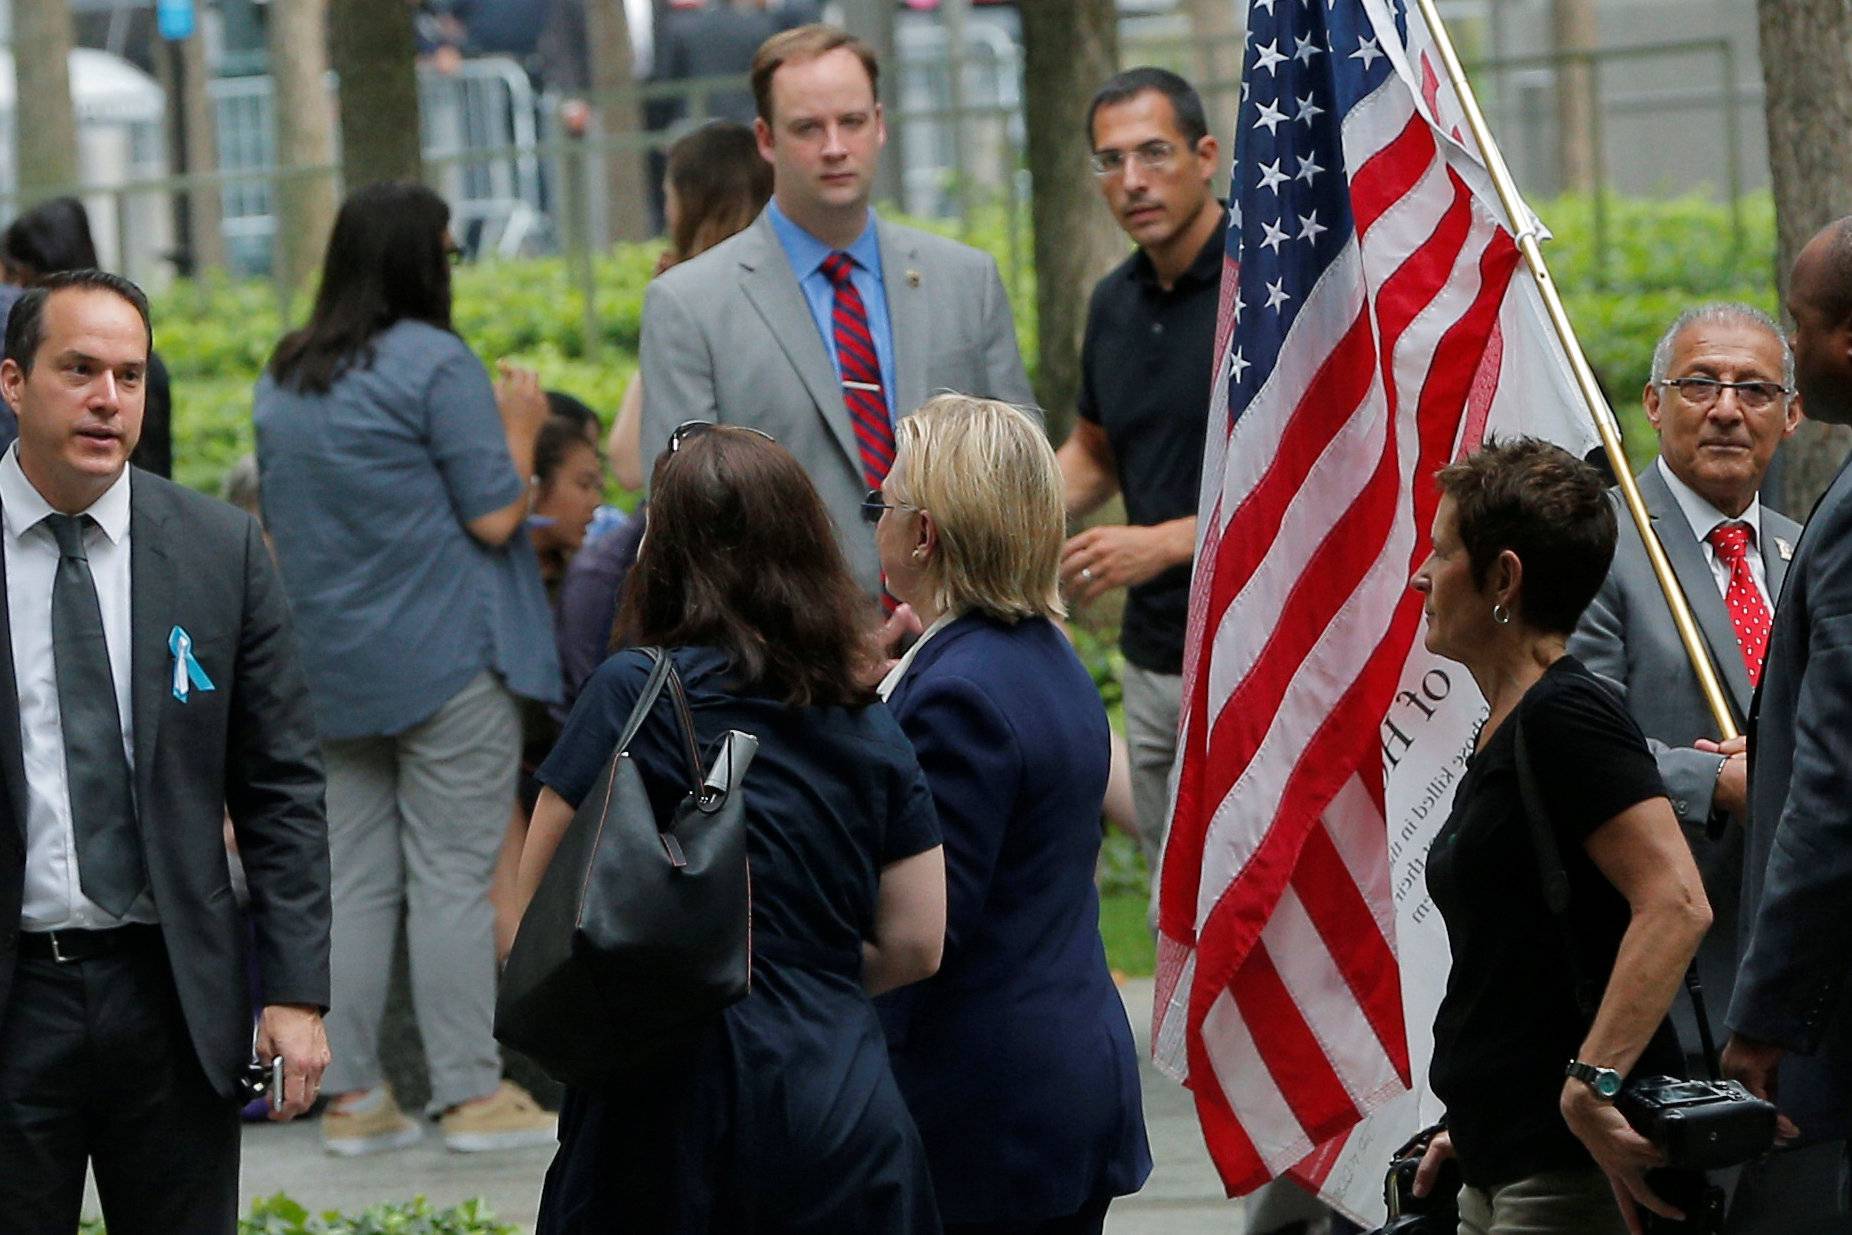 U.S. Democratic presidential candidate Hillary Clinton leaves ceremonies marking the 15th anniversary of the September 11 attacks at the National 9/11 Memorial in New York